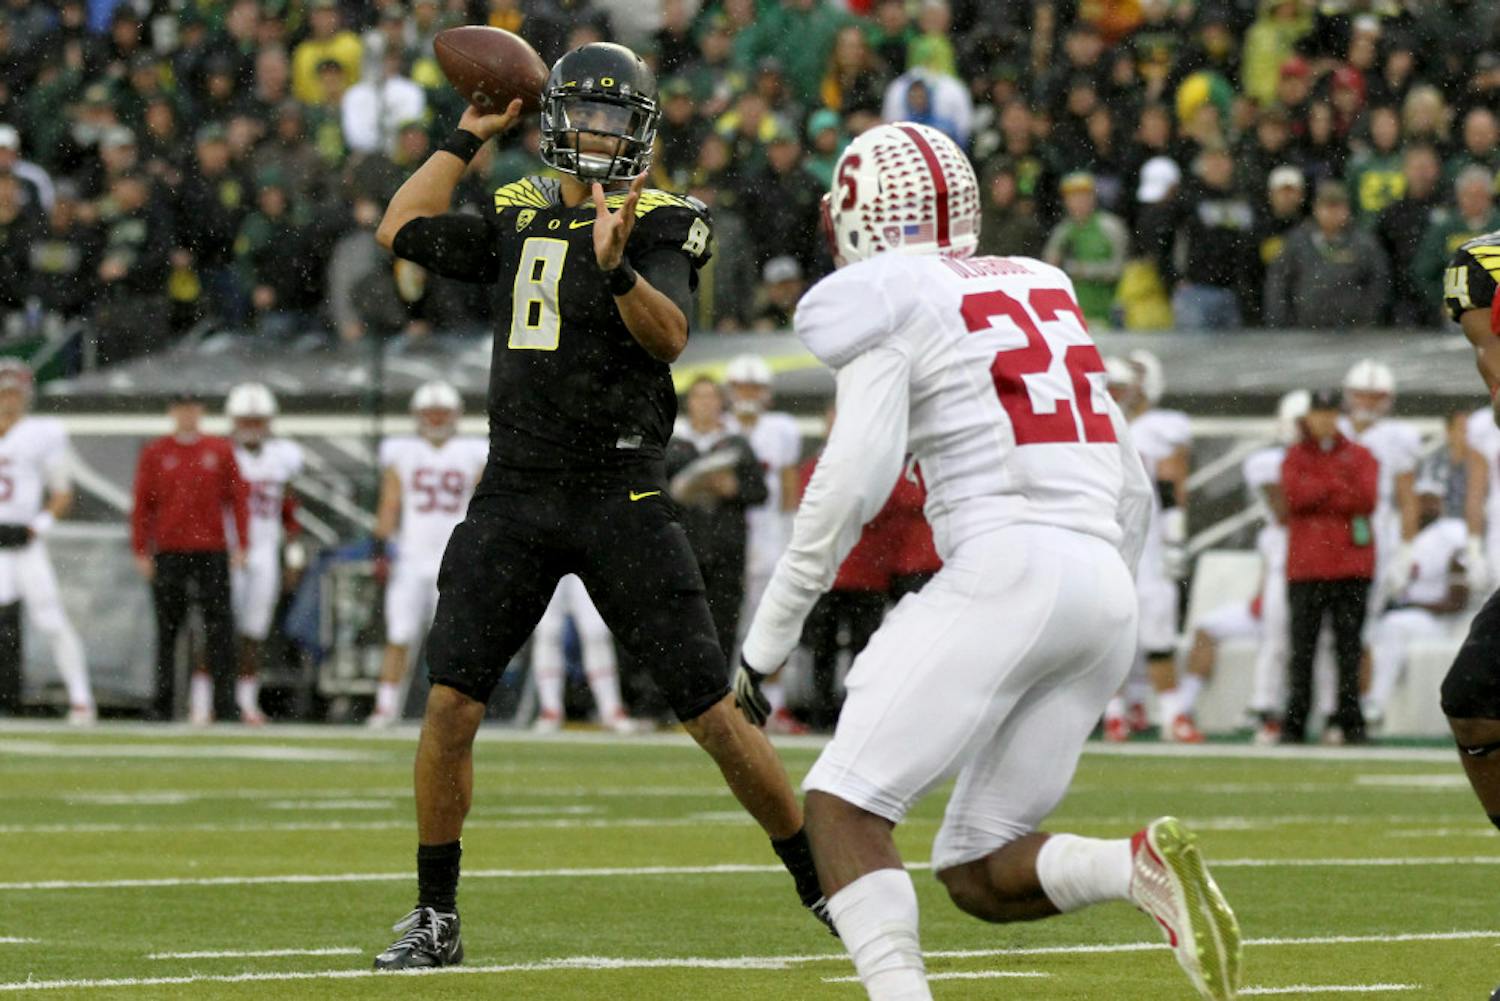 Oregon quarterback Marcus Mariota (8) looks to throw towards the end zone during the first quarter against Stanford in an NCAA college football game in Eugene, Ore., Saturday, Nov. 1, 2014. 